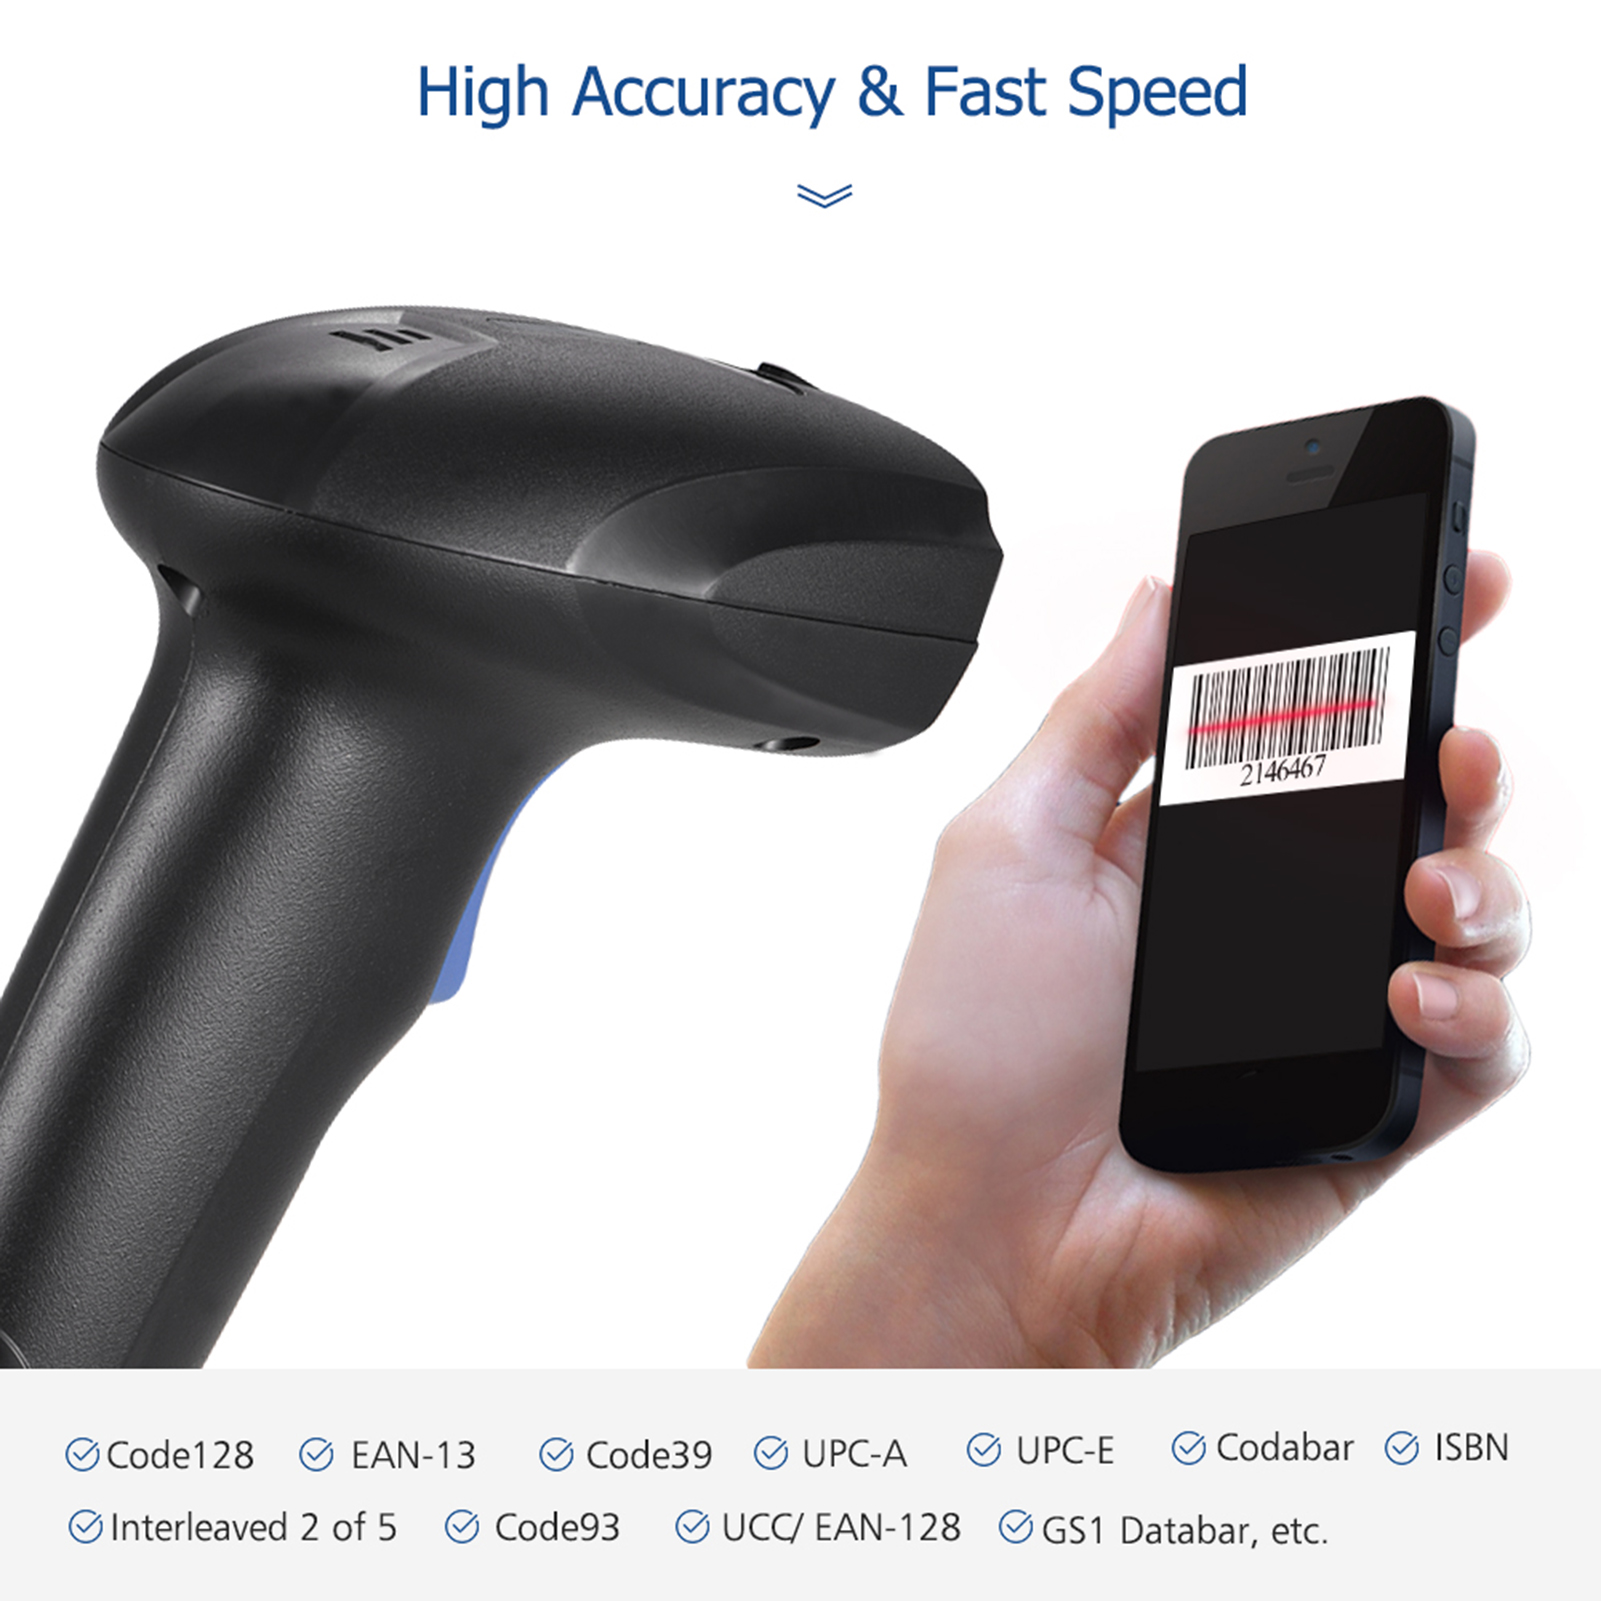 Andoer Handheld CCD Automatic USB Wired 1D Bar Code Reader for Mobile Payment Computer Screen Scan - image 5 of 7